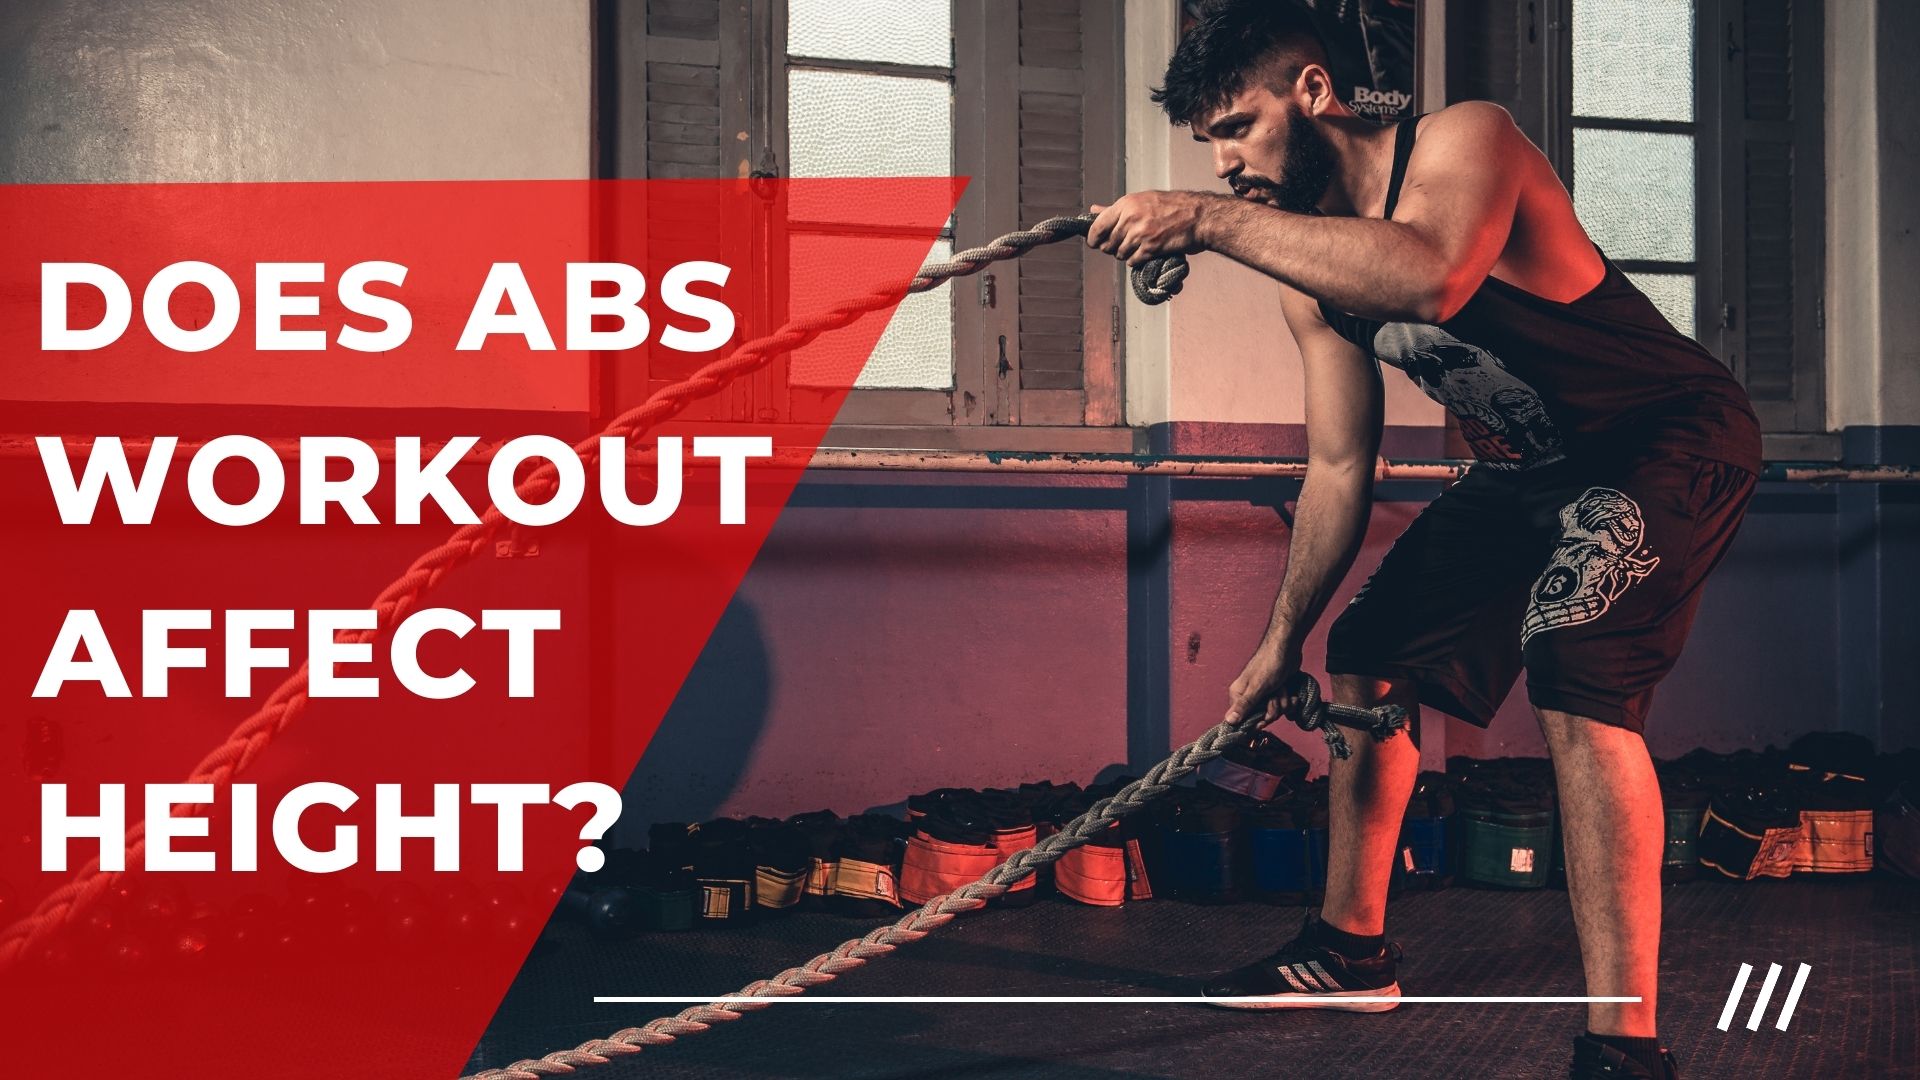 Debunking the Myth: Does Abs Workout Affect Height?